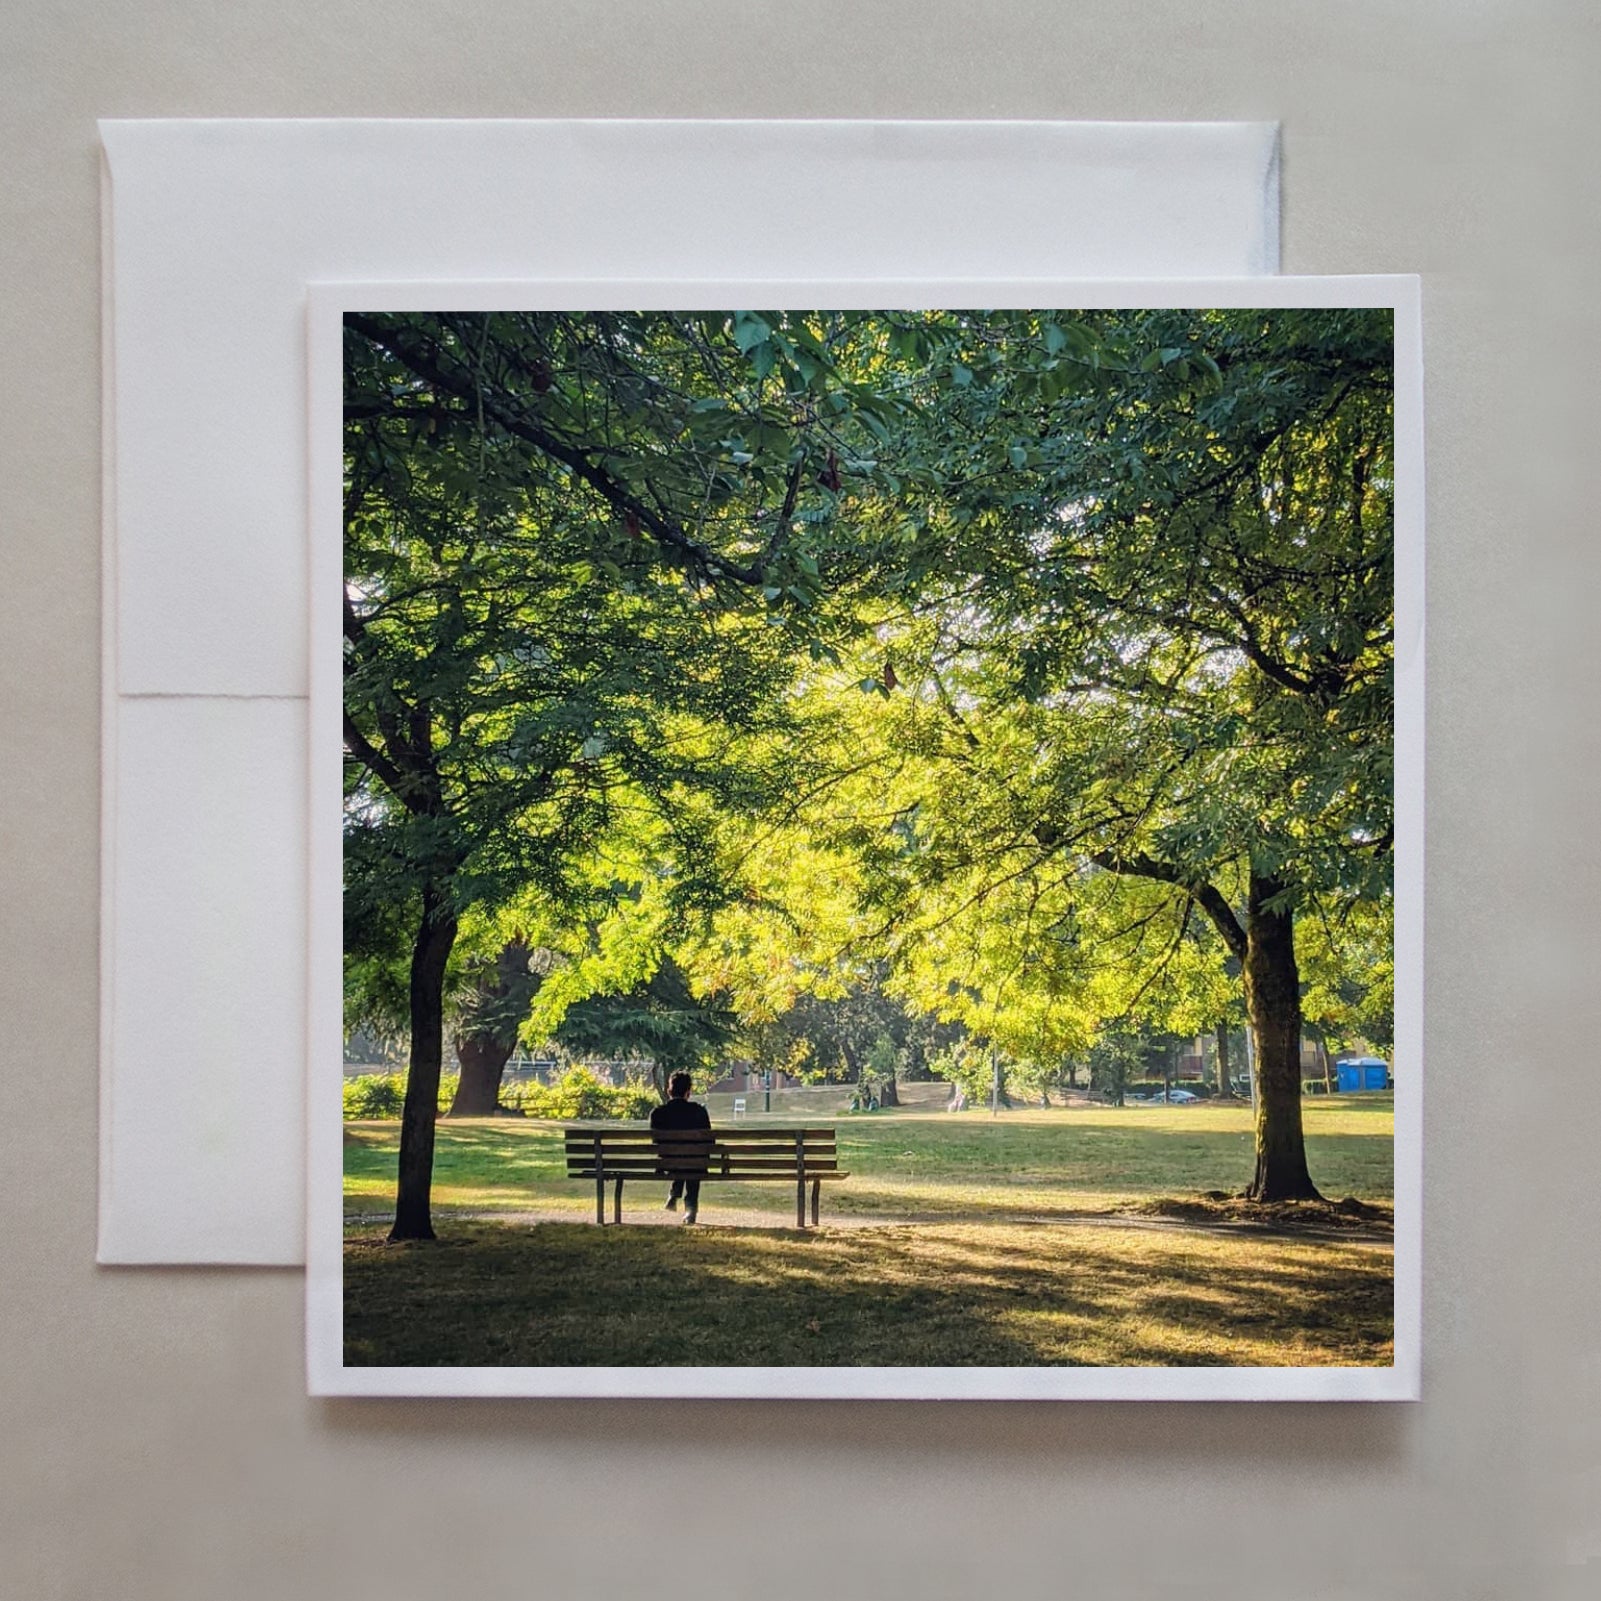 This notecard is of a person  reflecting on a park bench while sunlight drapes through summer-lush trees by photographer Jen Echols.